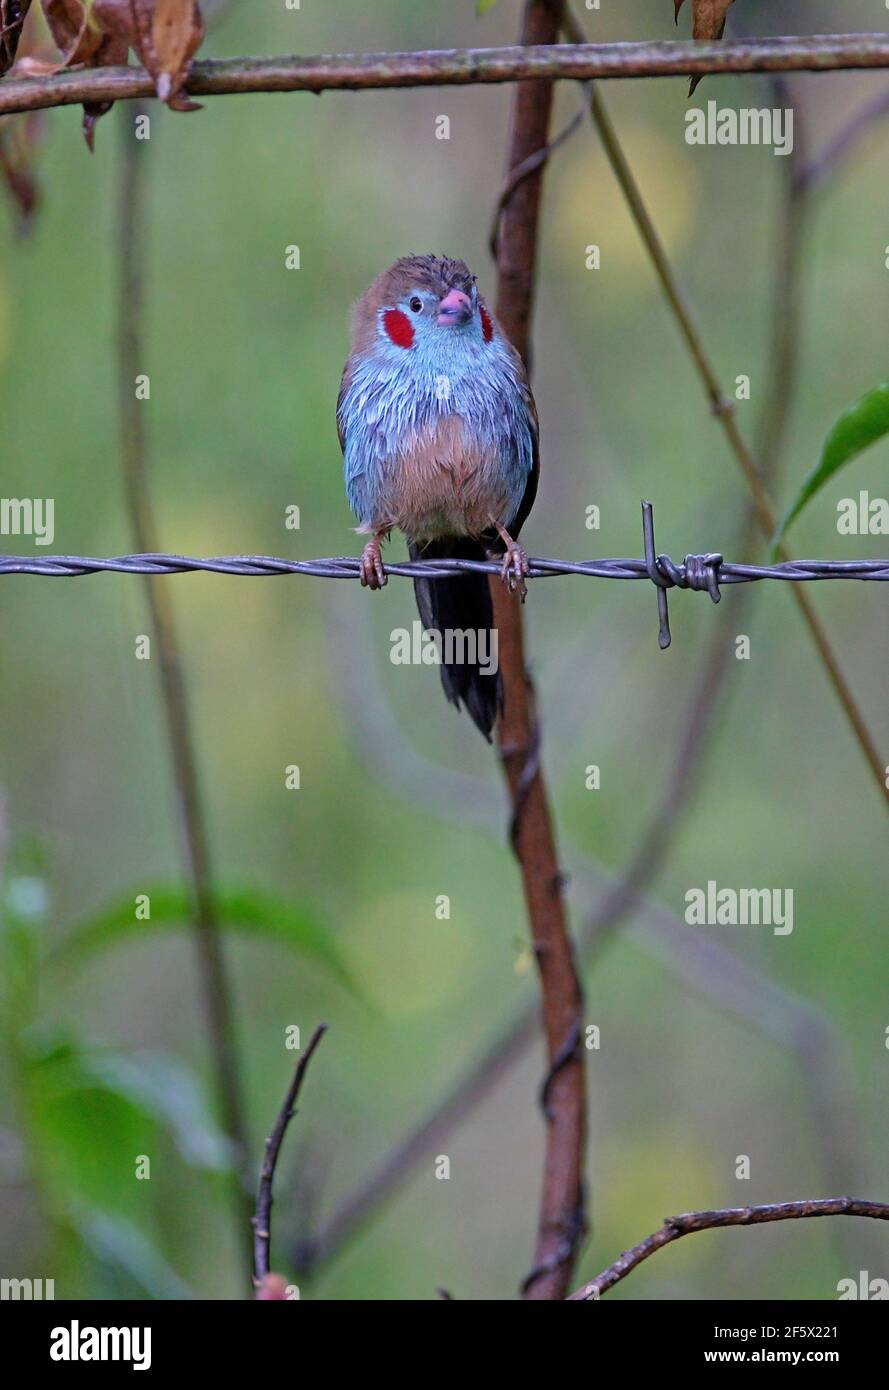 Red-cheeked Cordon-bleu (Uraeginthus bengalus bengalus) male perched on barbed-wire fence after a downpour Lake Naivasha, Kenya           October Stock Photo